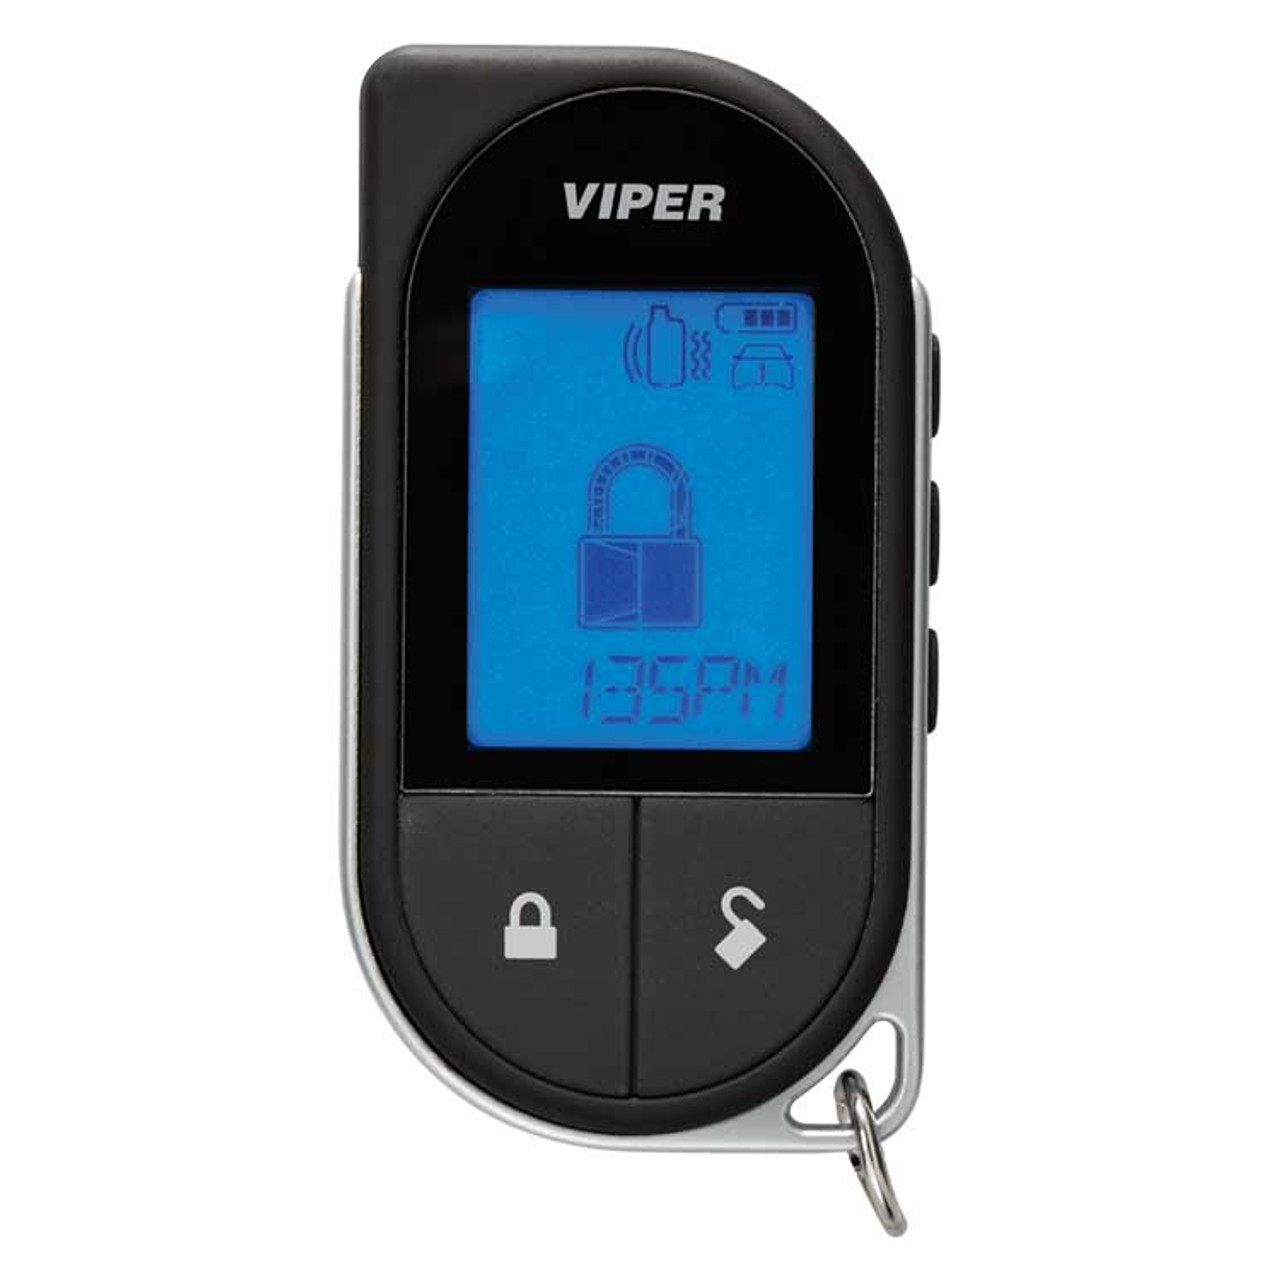 Viper D9756V 2-Way, LCD Remote Start & Security System with Bypass (5706V)